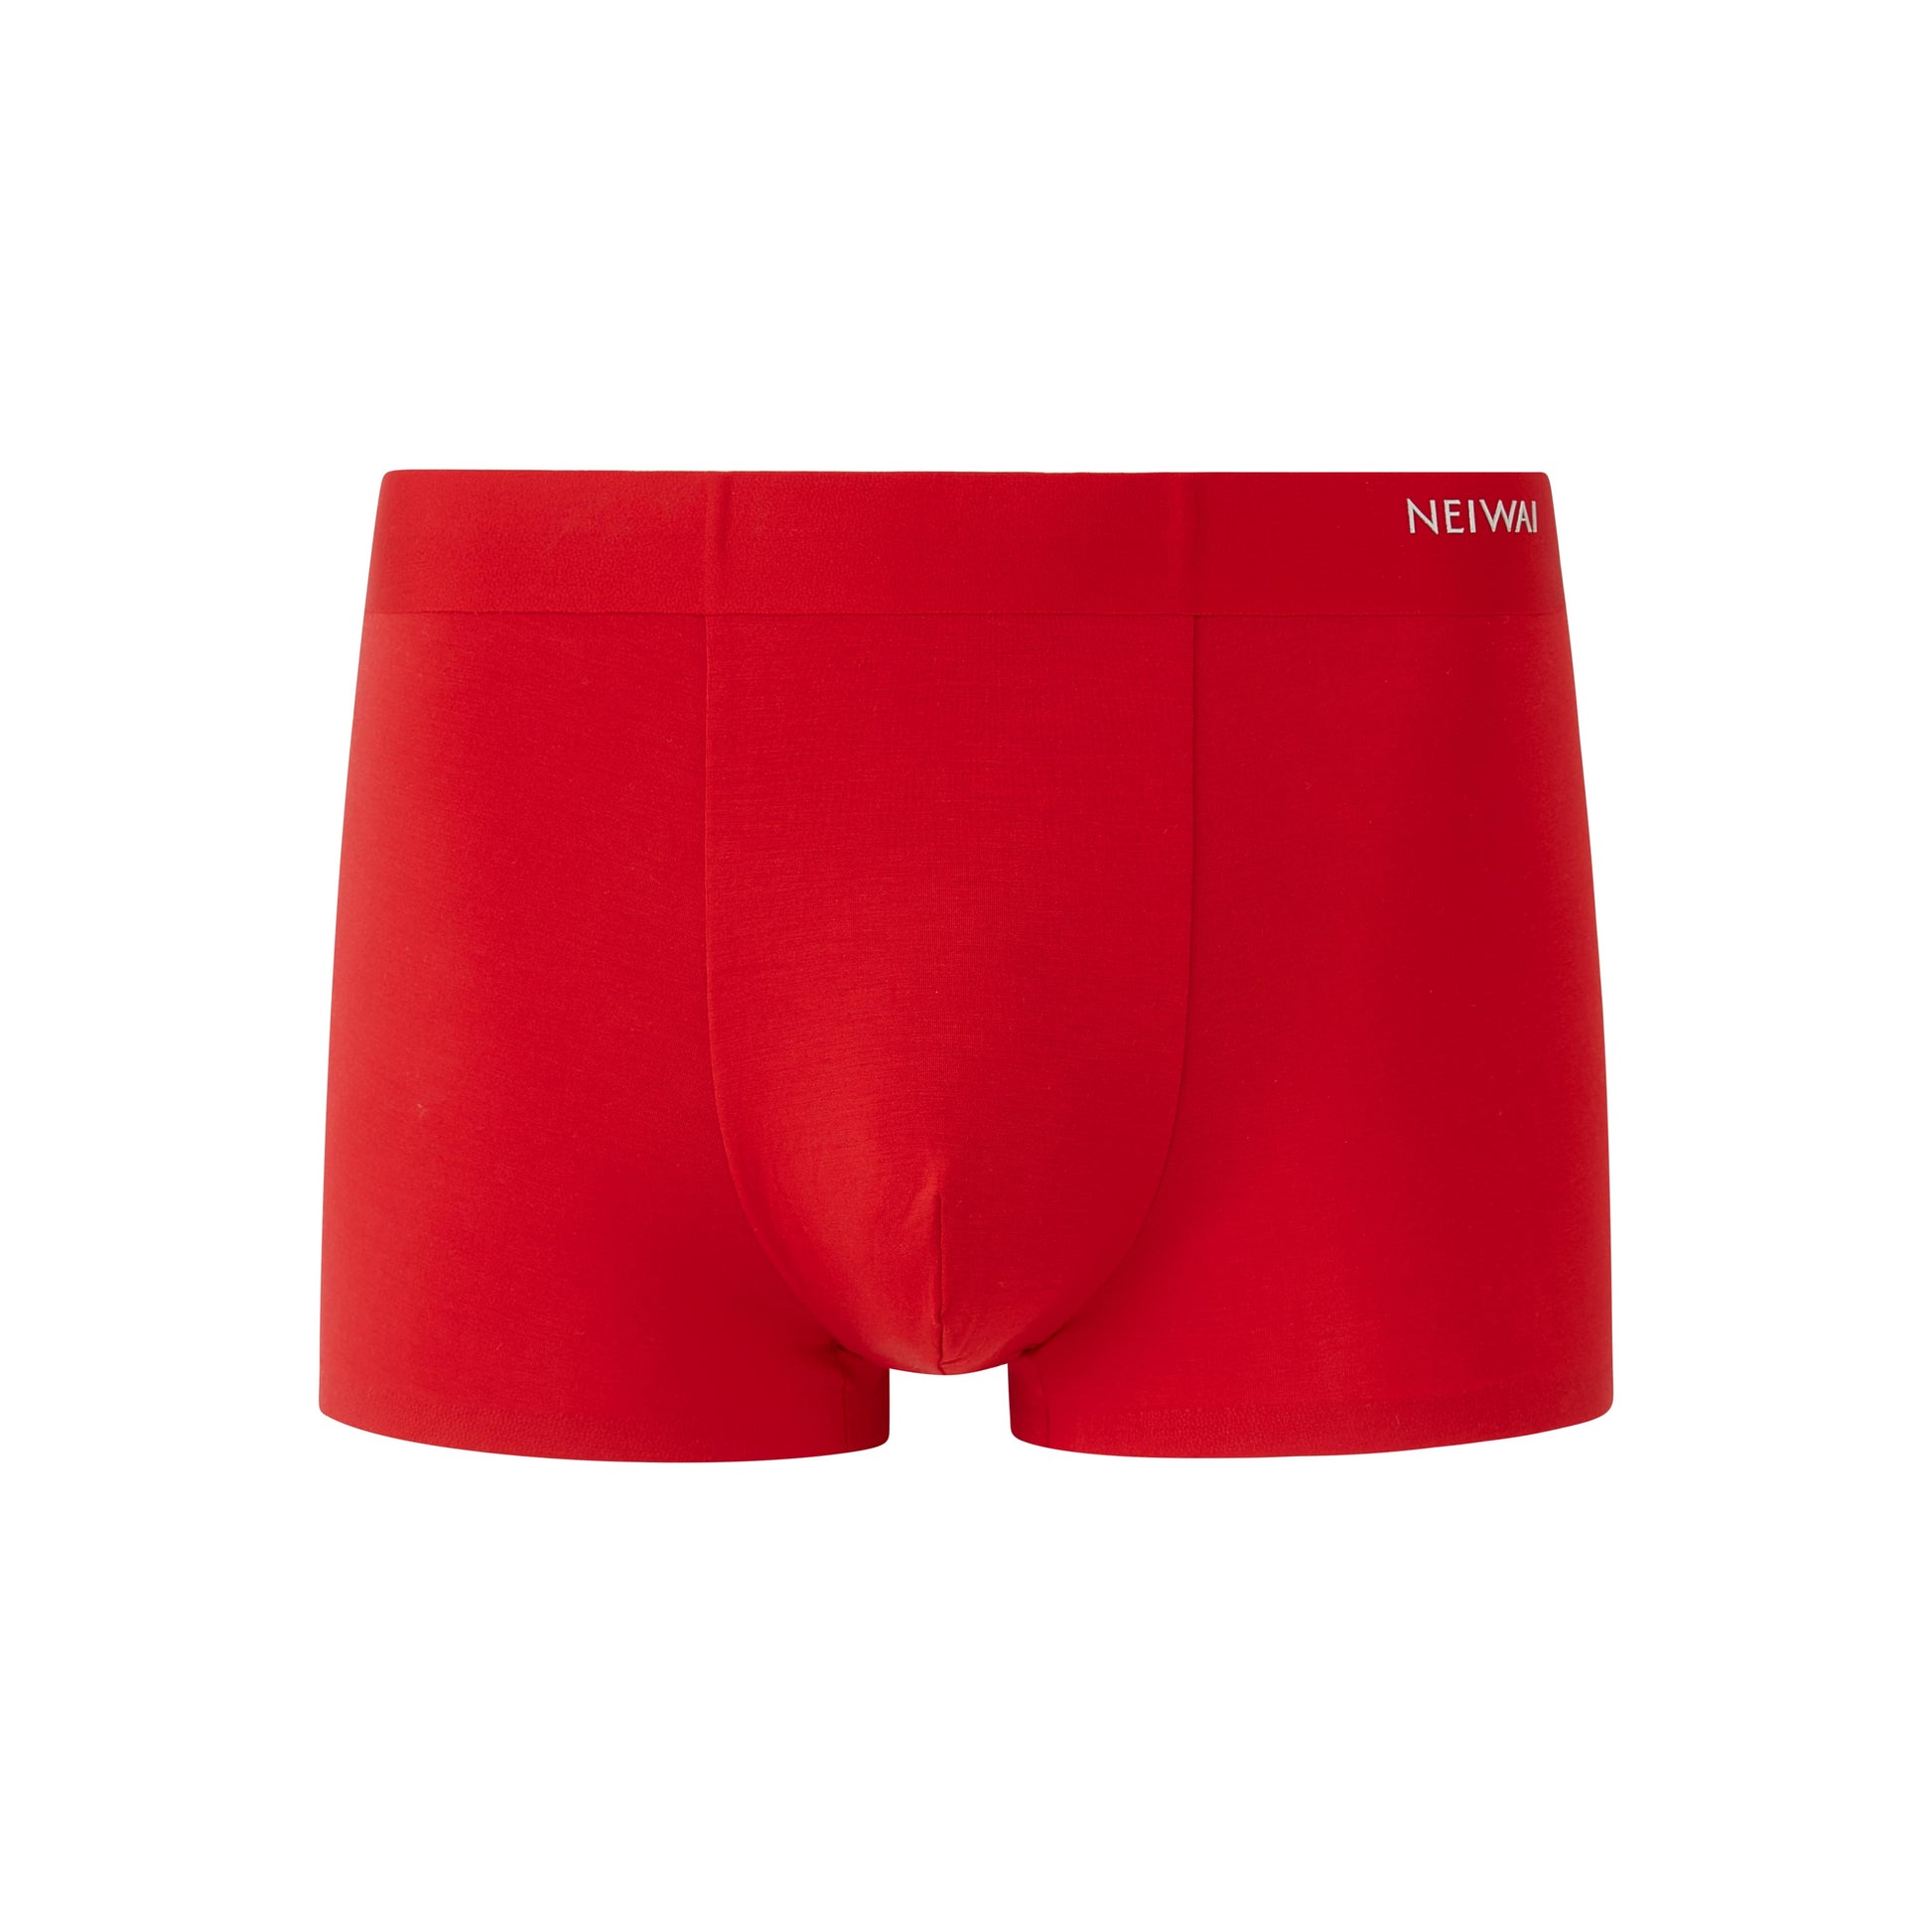 a pair of red brief